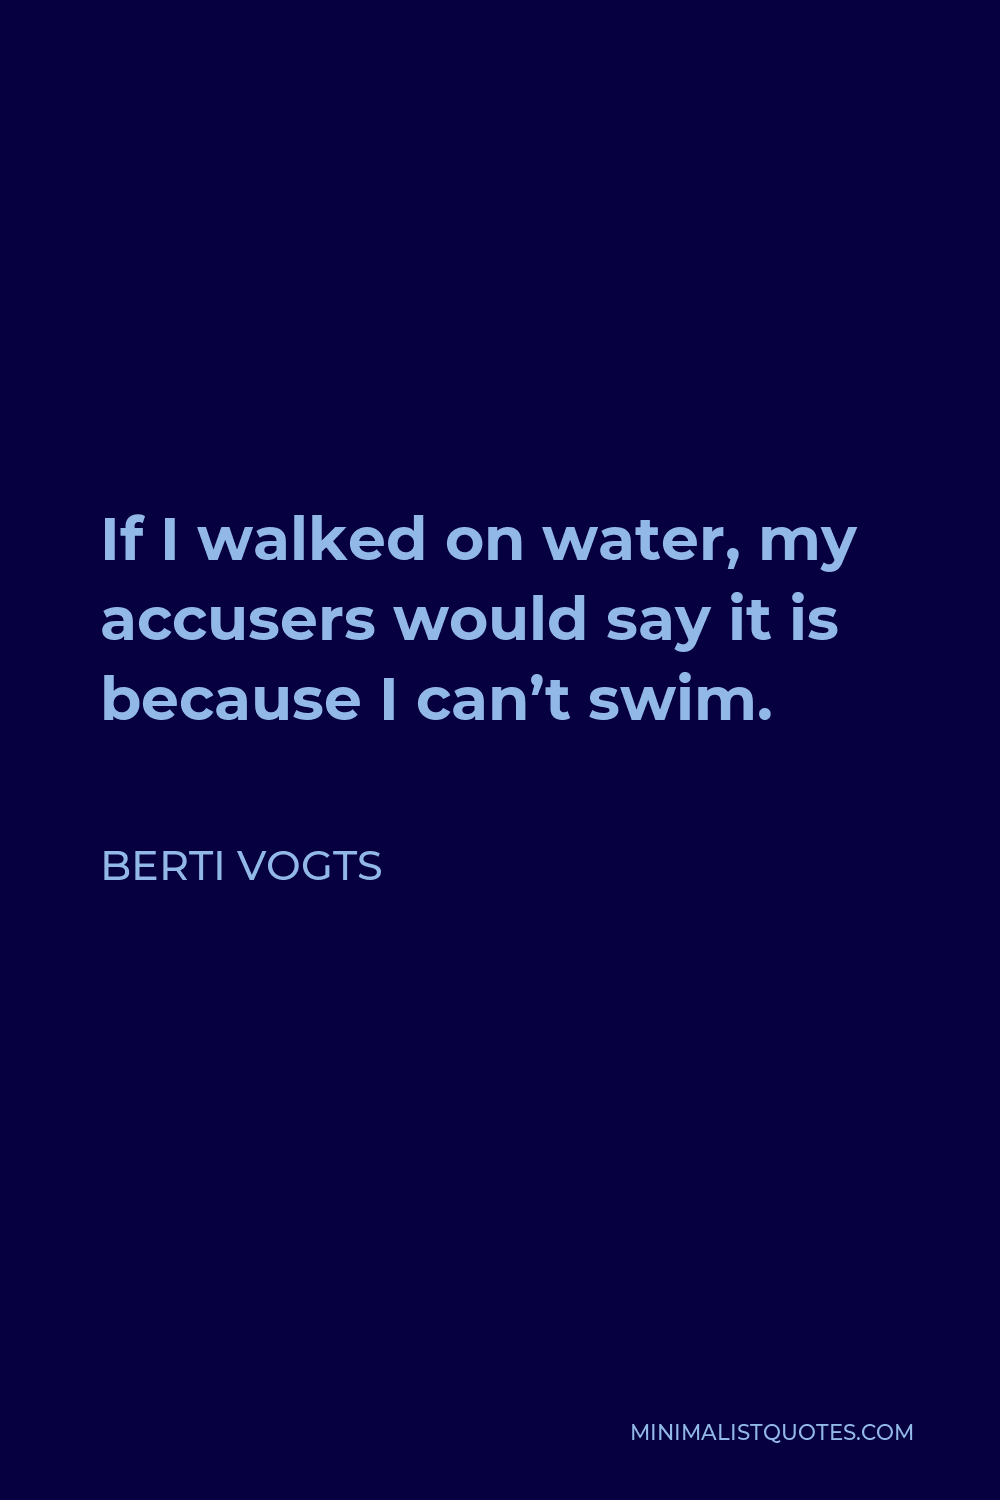 Berti Vogts Quote - If I walked on water, my accusers would say it is because I can’t swim.